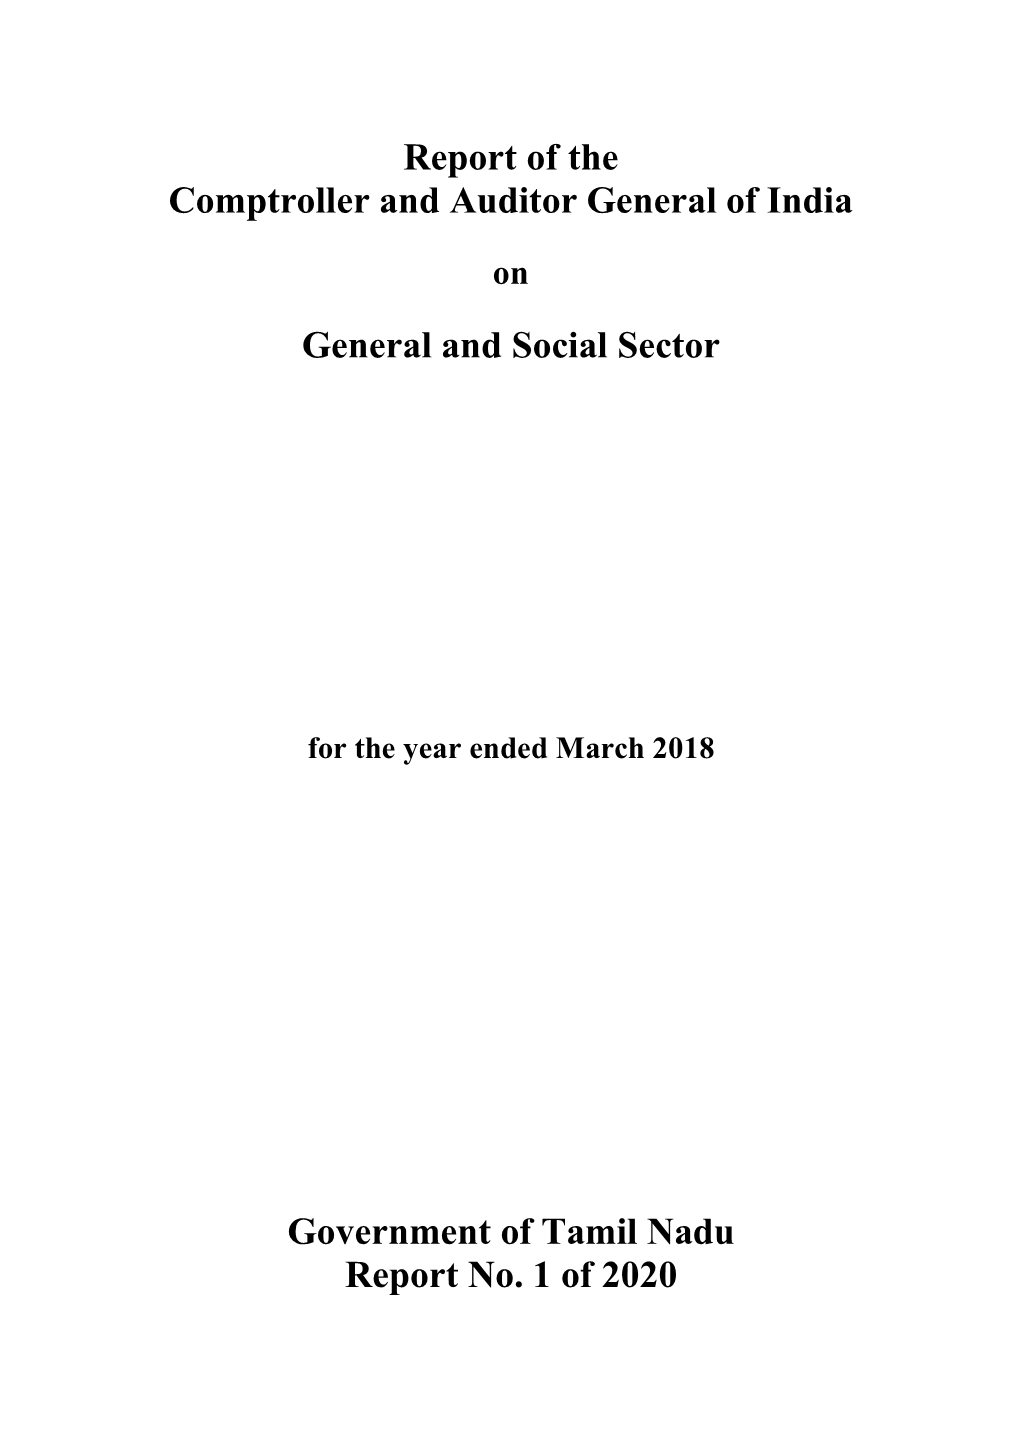 Report of the Comptroller and Auditor General of India General and Social Sector Government of Tamil Nadu Report No. 1 of 2020